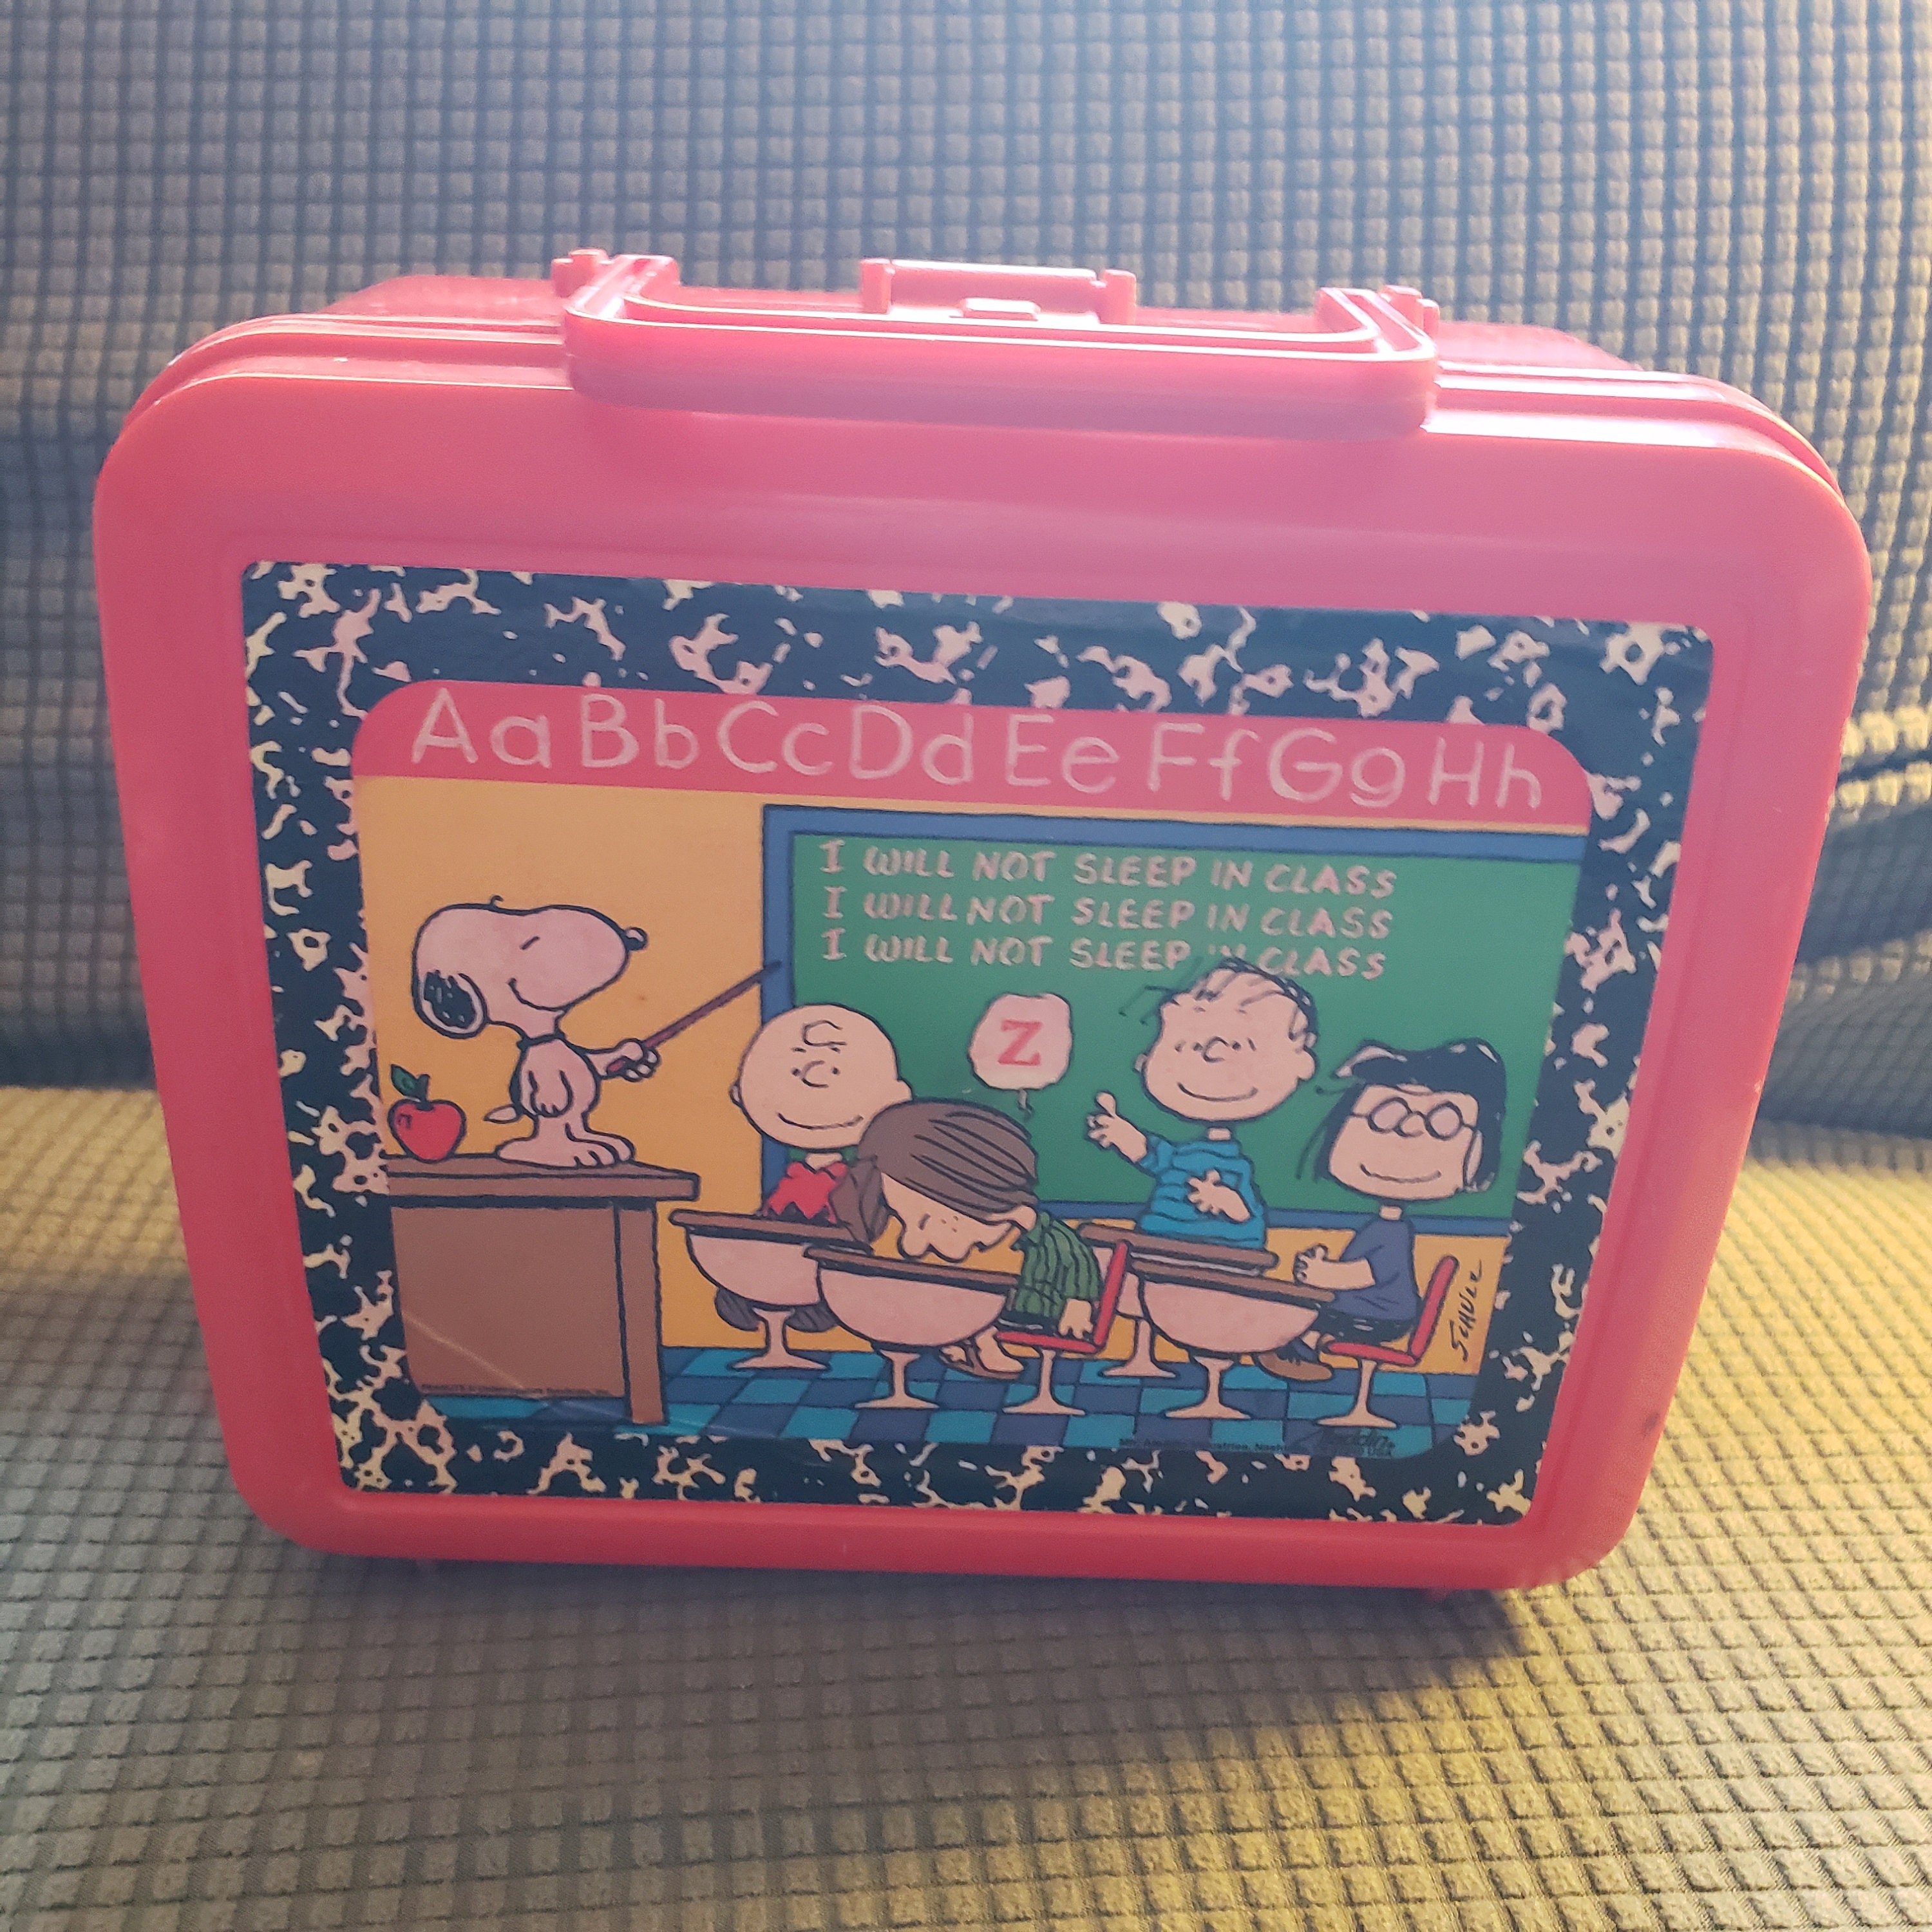 Peanuts Snoopy Vintage Lunch Box with Thermos & McDonald's Sheriff of  Cactus Canyon Lunch Box for Sale in Brea, CA - OfferUp